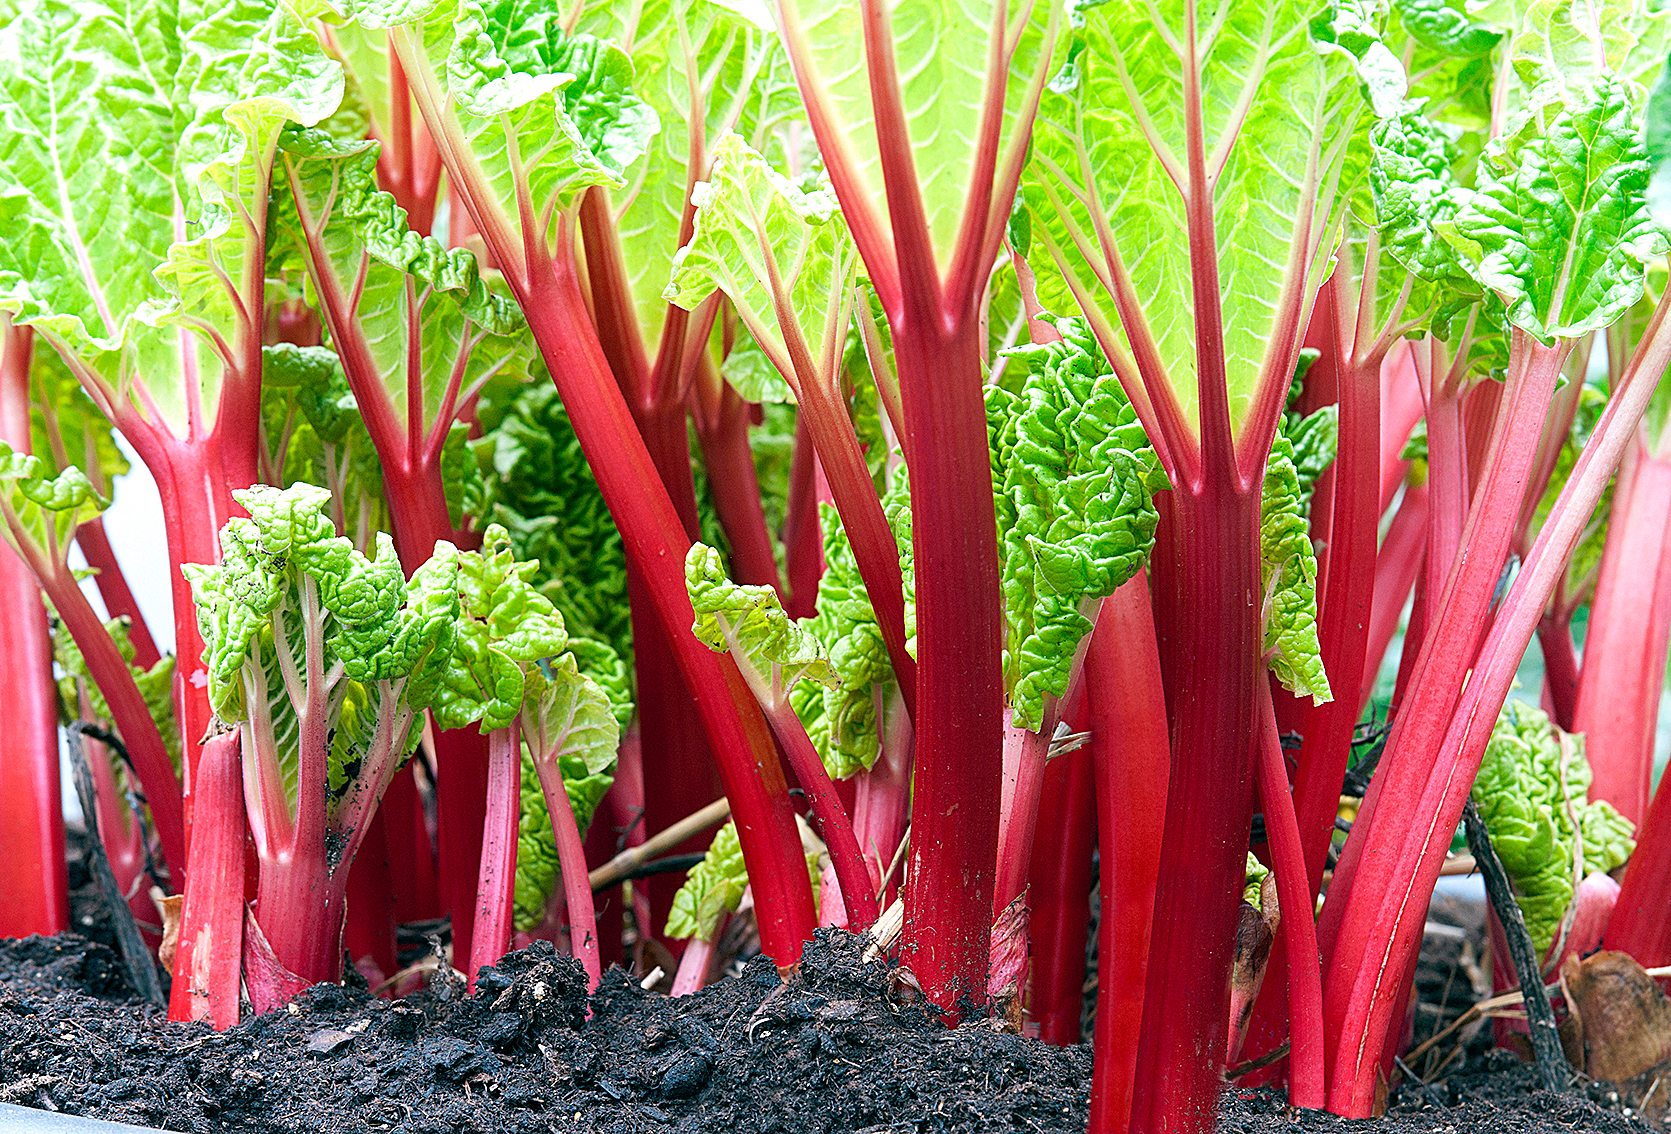 Close-up of rhubarb red stems in the vegetable garden with a nice contrast between red ans green